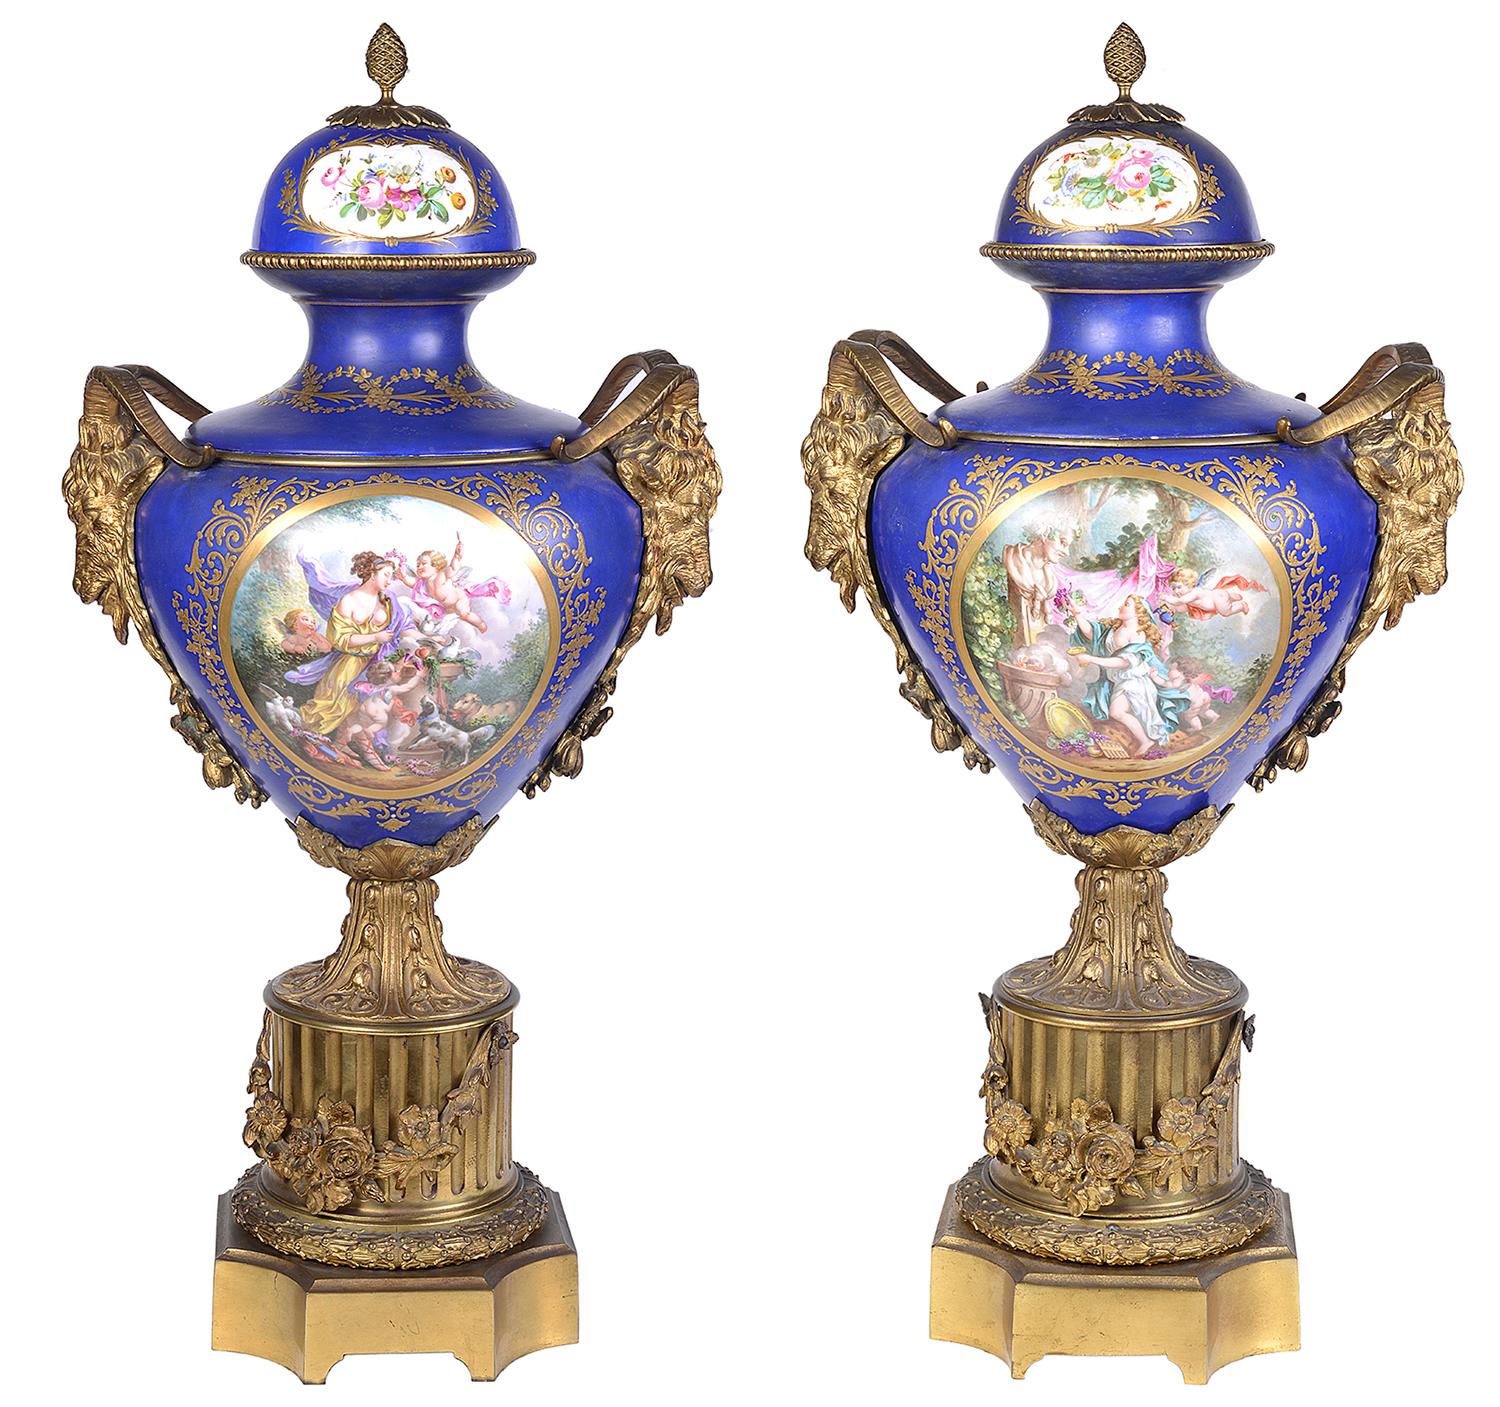 Pair Of 19th Century Sevres Style Porcelain And Ormolu Lidded Vases For Sale At 1stdibs 